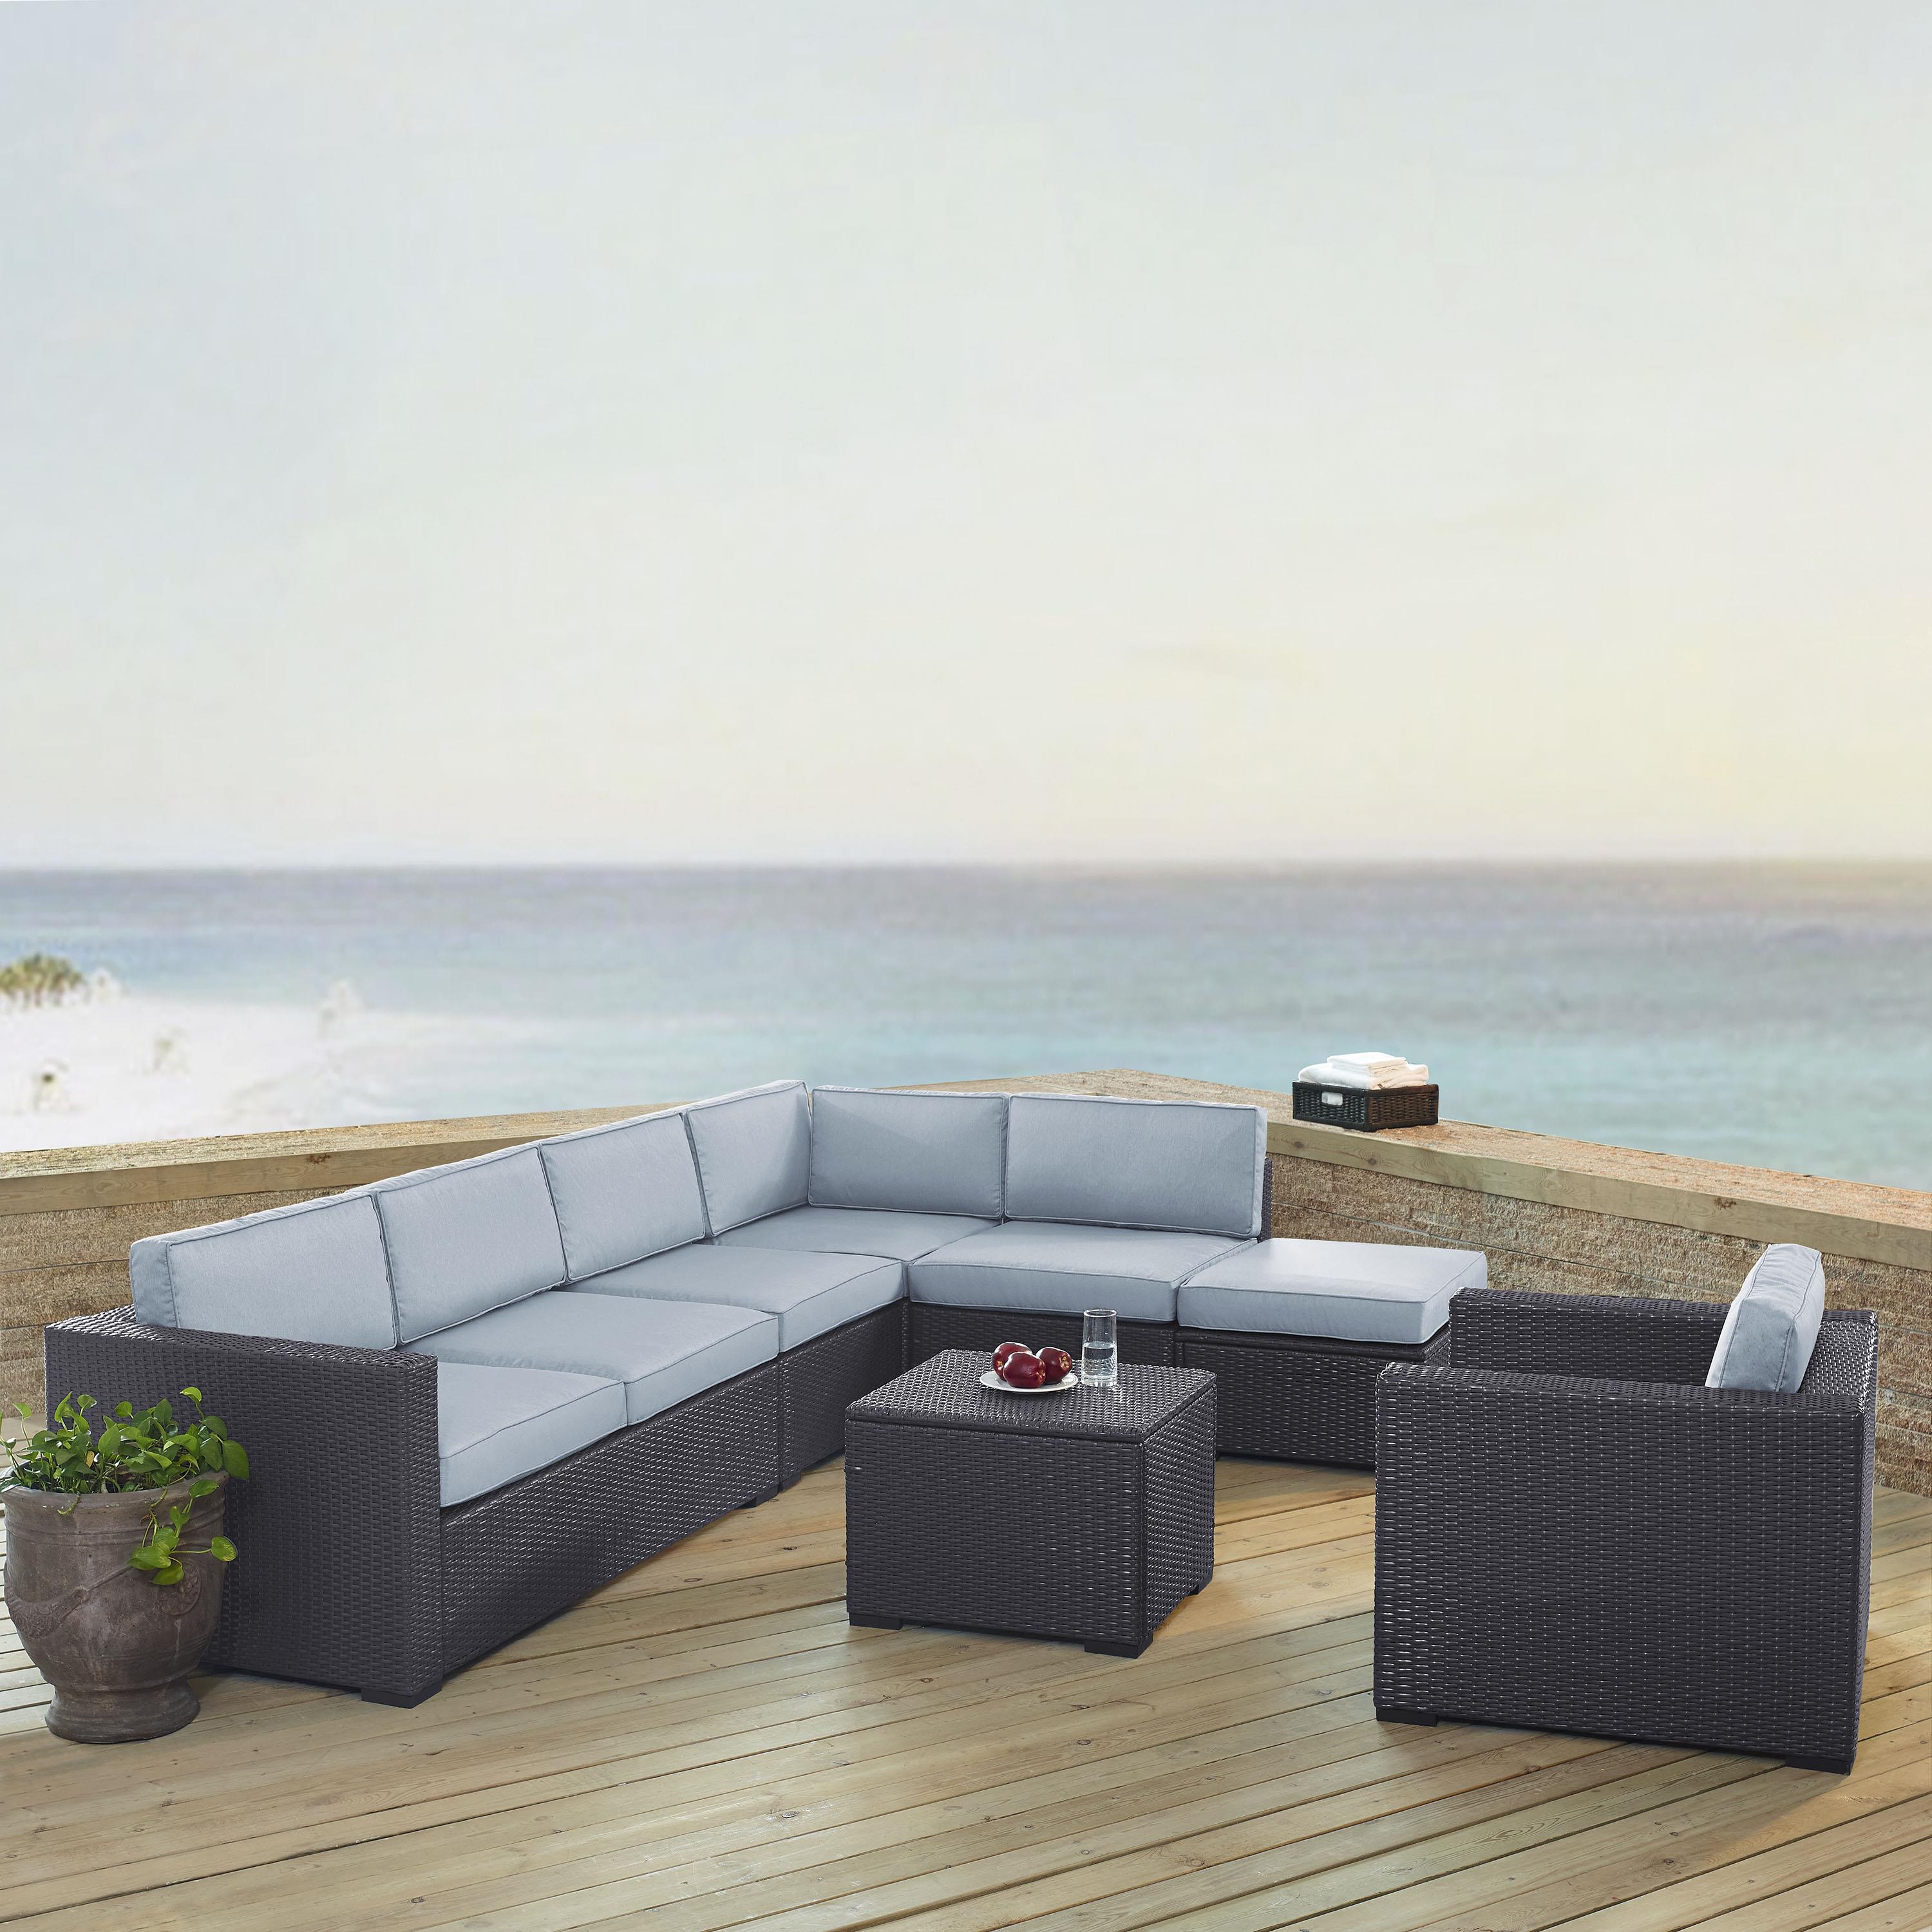 Crosley Furniture Biscayne 6 Piece Metal Patio Sectional Set in Brown/Blue - image 4 of 4